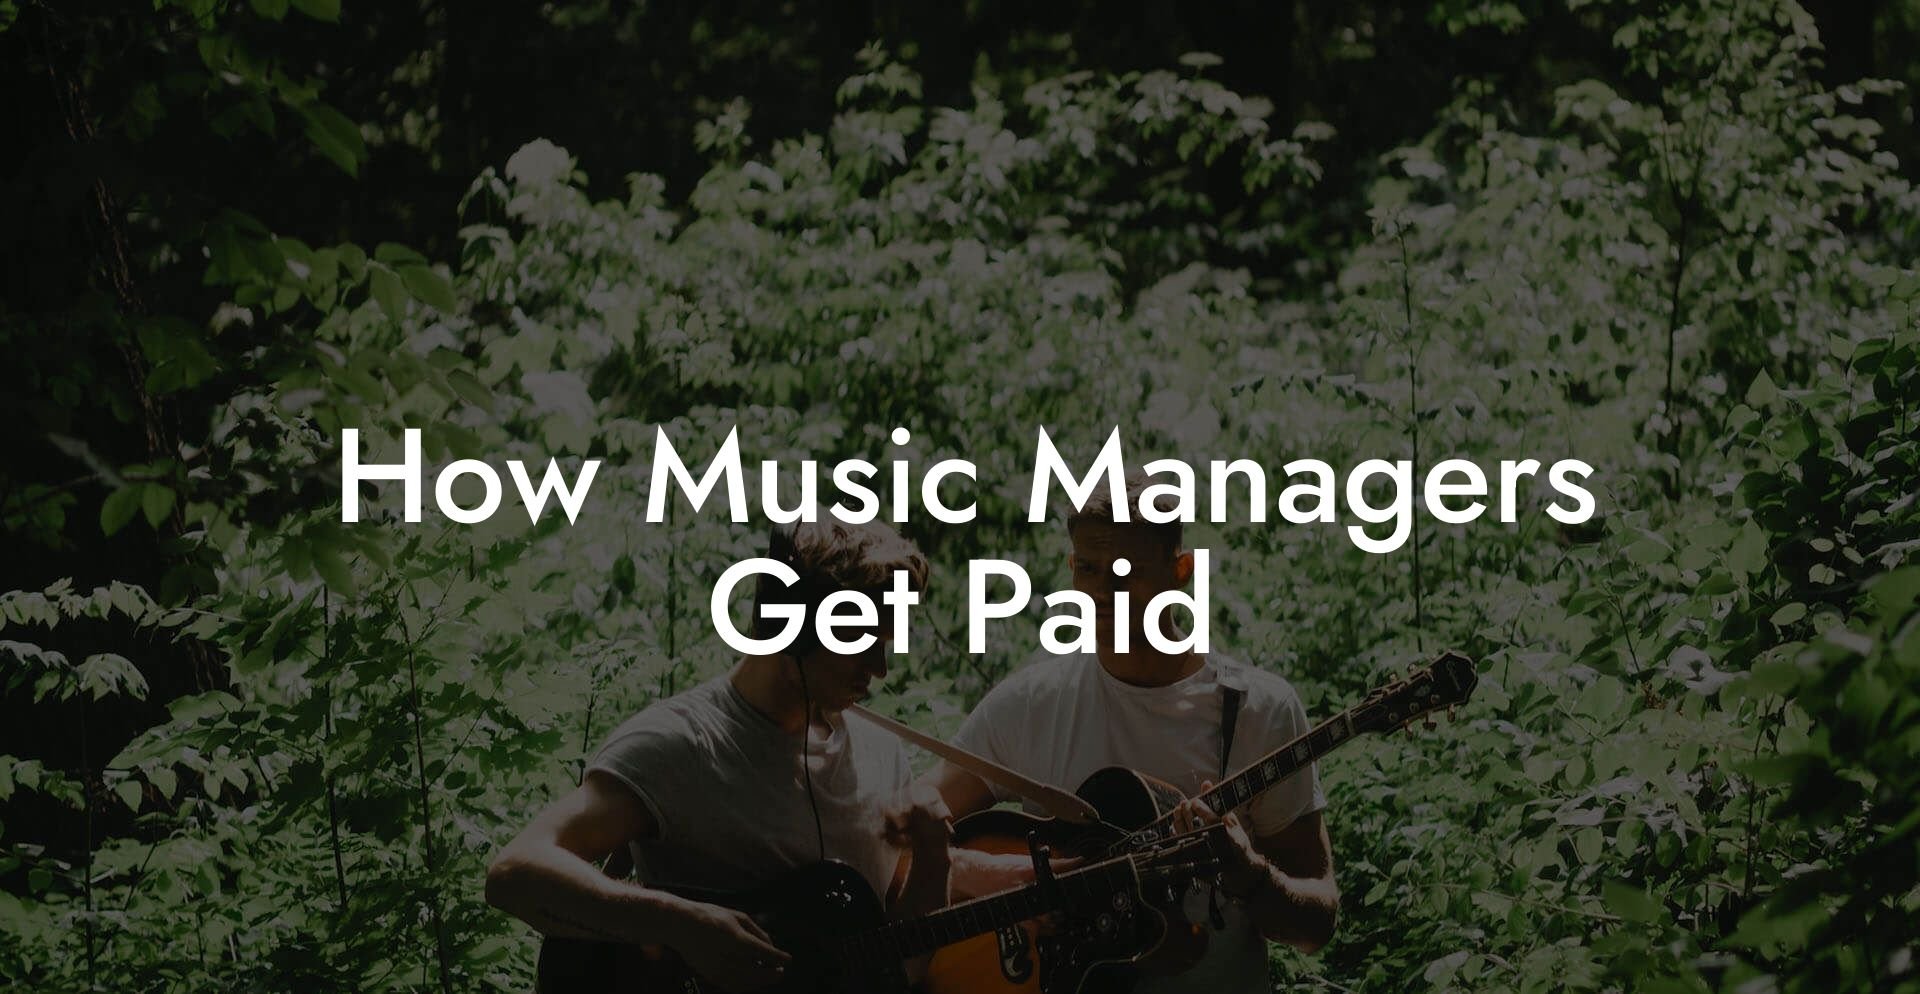 How Music Managers Get Paid